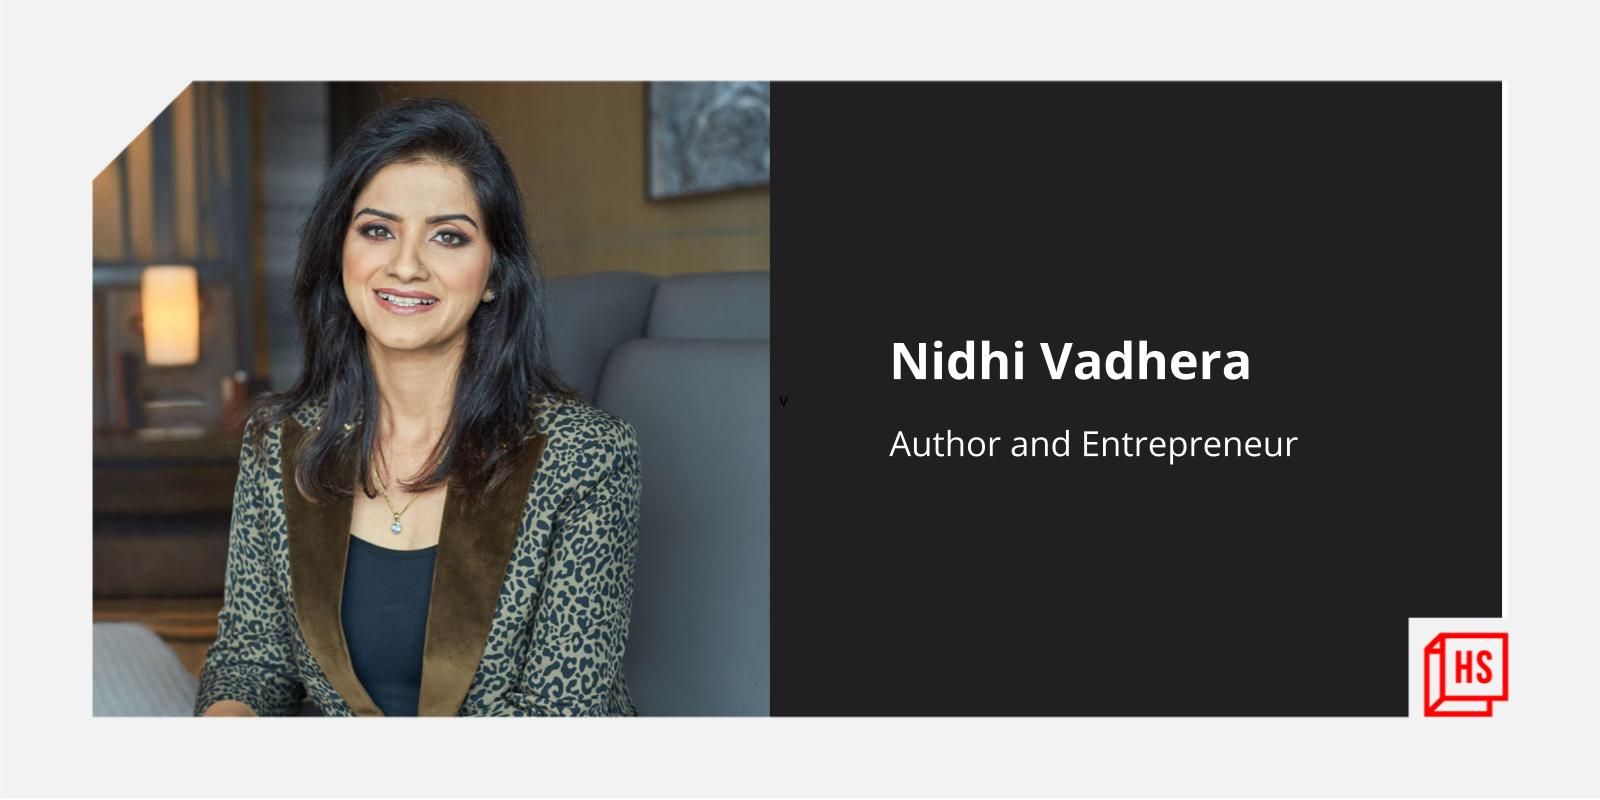 From working as a banker to writing a book on sales, to launching educational content: The journey of Nidhi Vadhera